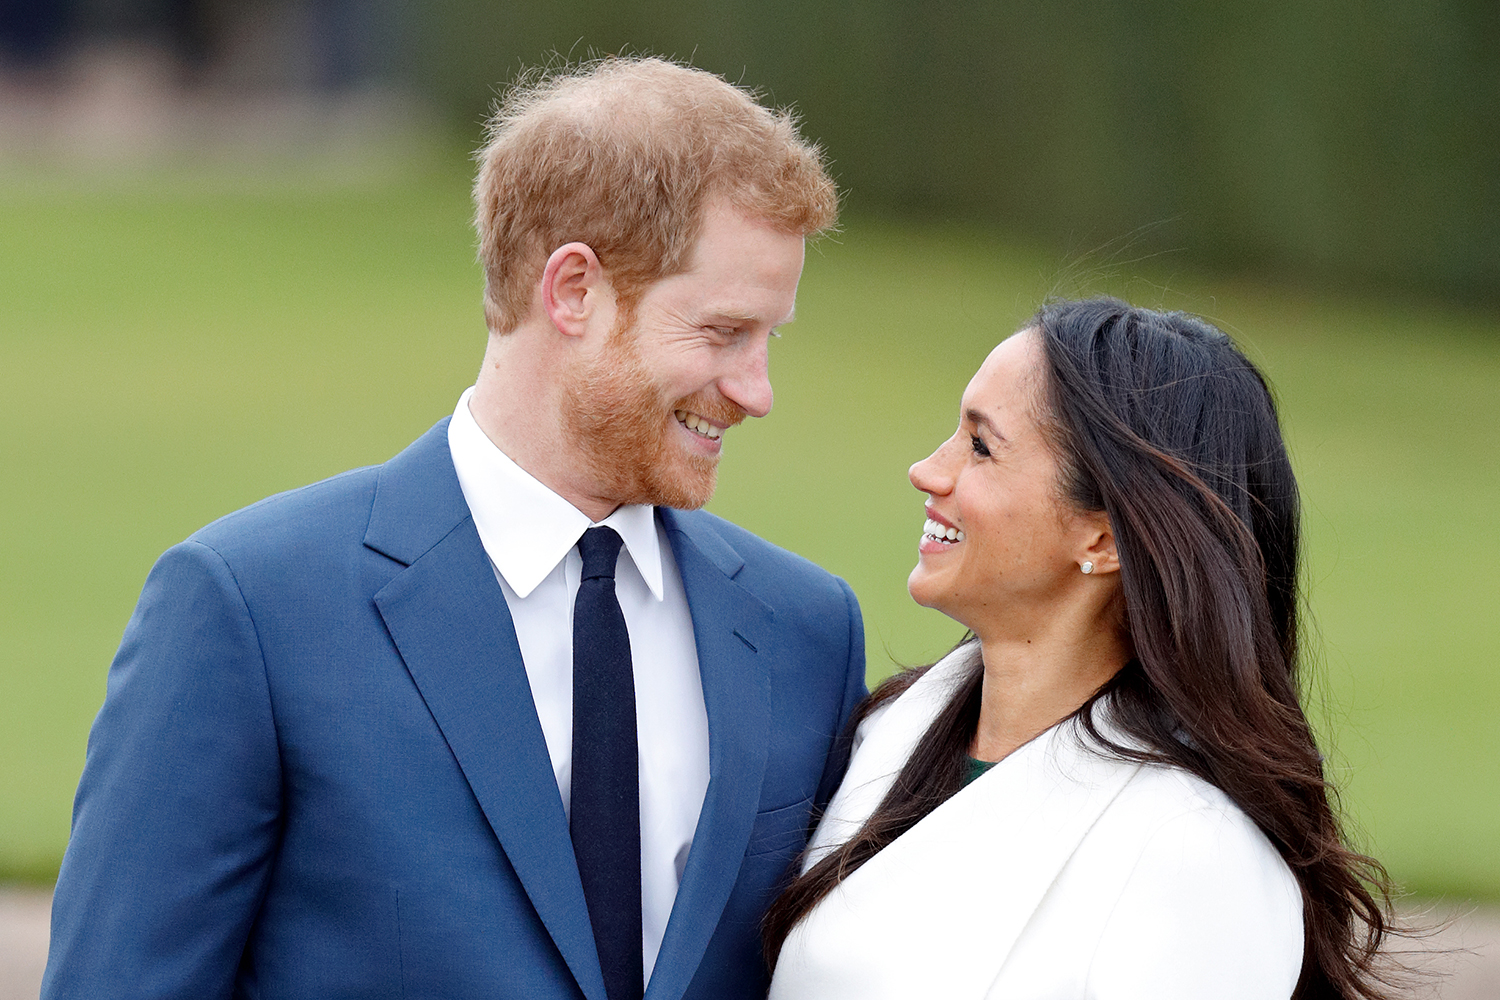 Every Way Prince Harry And Meghan Markle’s Wedding Will Differ from Prince William And Kate Middleton’s